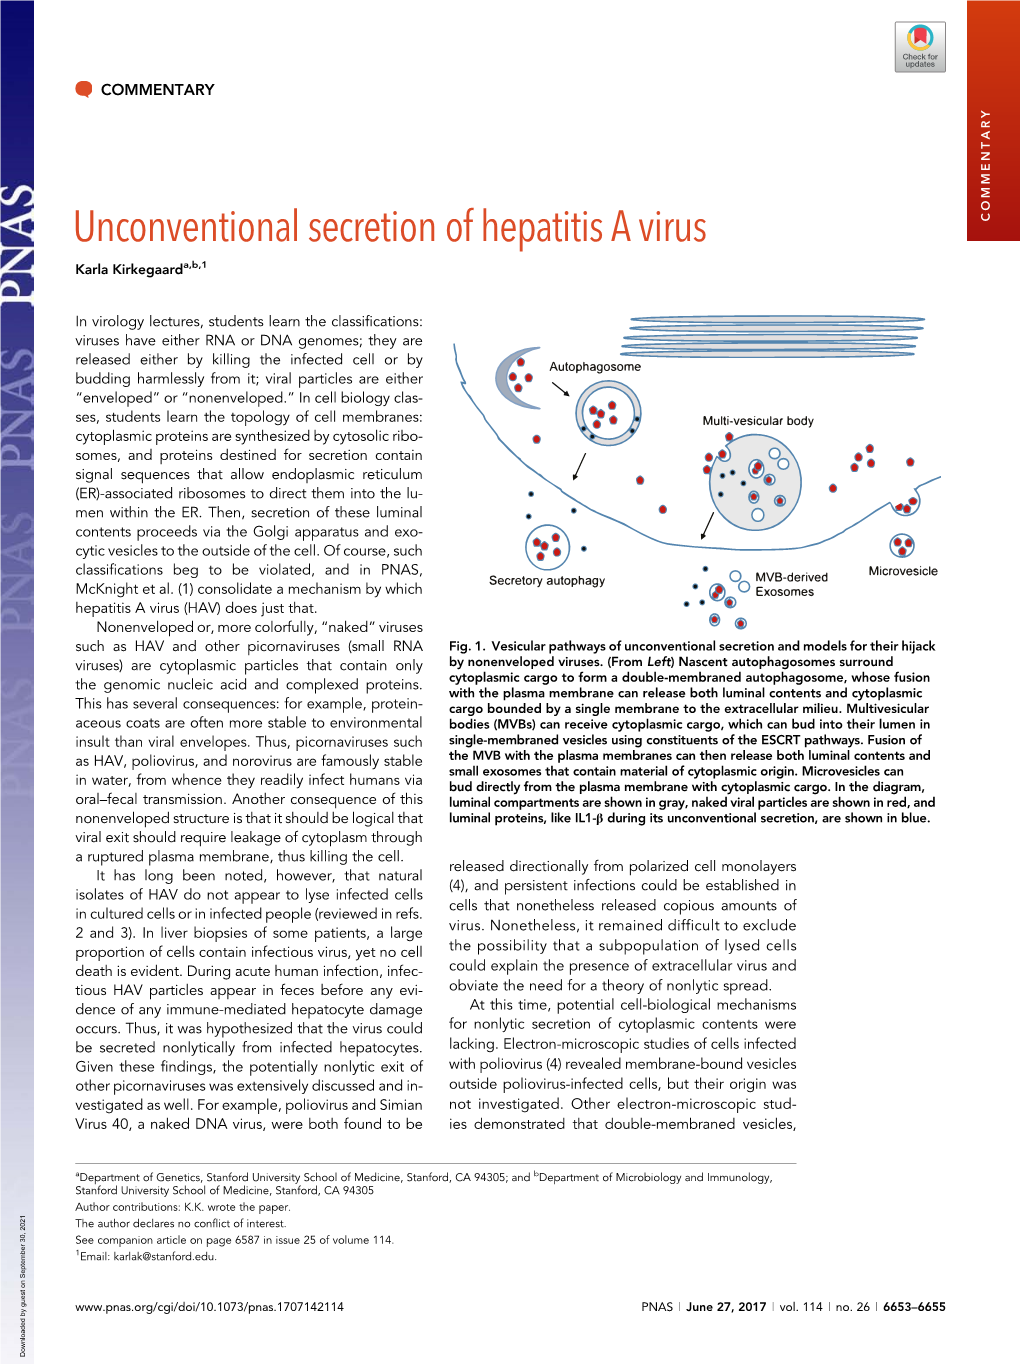 Unconventional Secretion of Hepatitis a Virus COMMENTARY